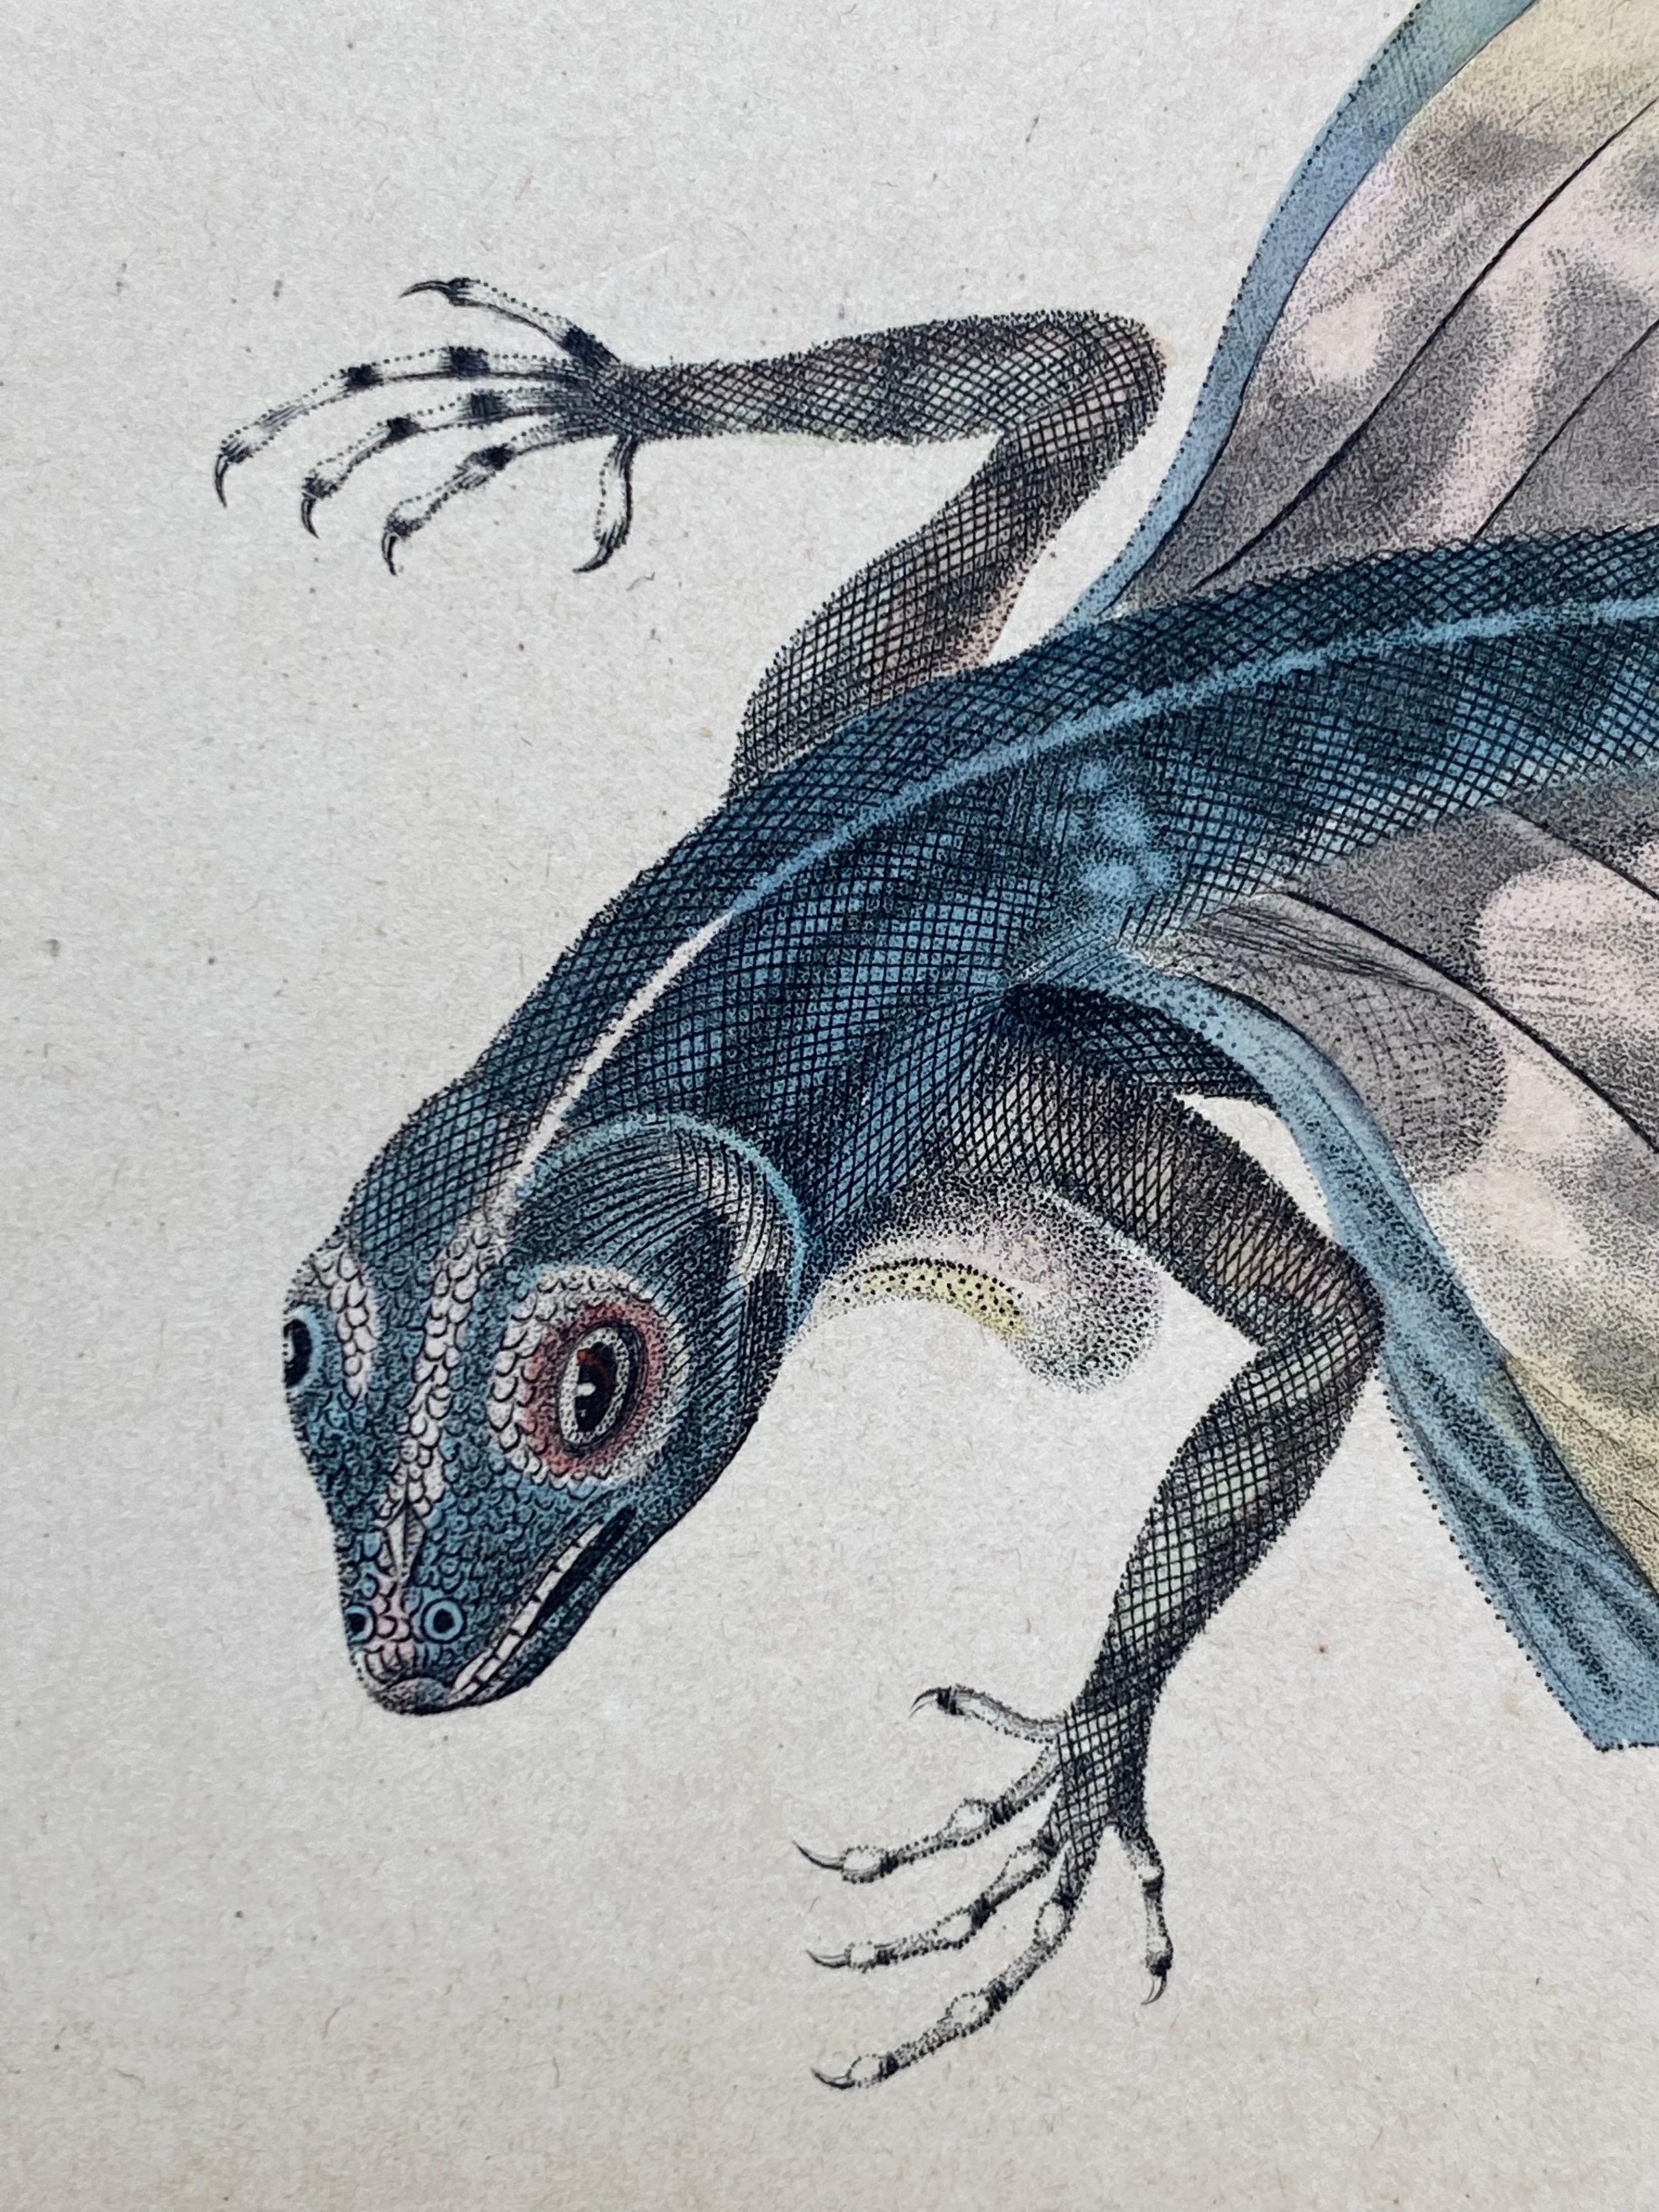 Set of 4 Hand colored prints (2 sheets) depicting rare reptiles published in 1840 based on the work of Scottish naturalist, Sir William Jardine, 7th Baronet.  

Includes a:
Draco Viridis (flying lizard)
Drancunculus Lineatus 
Lamprolepis Smaragdina